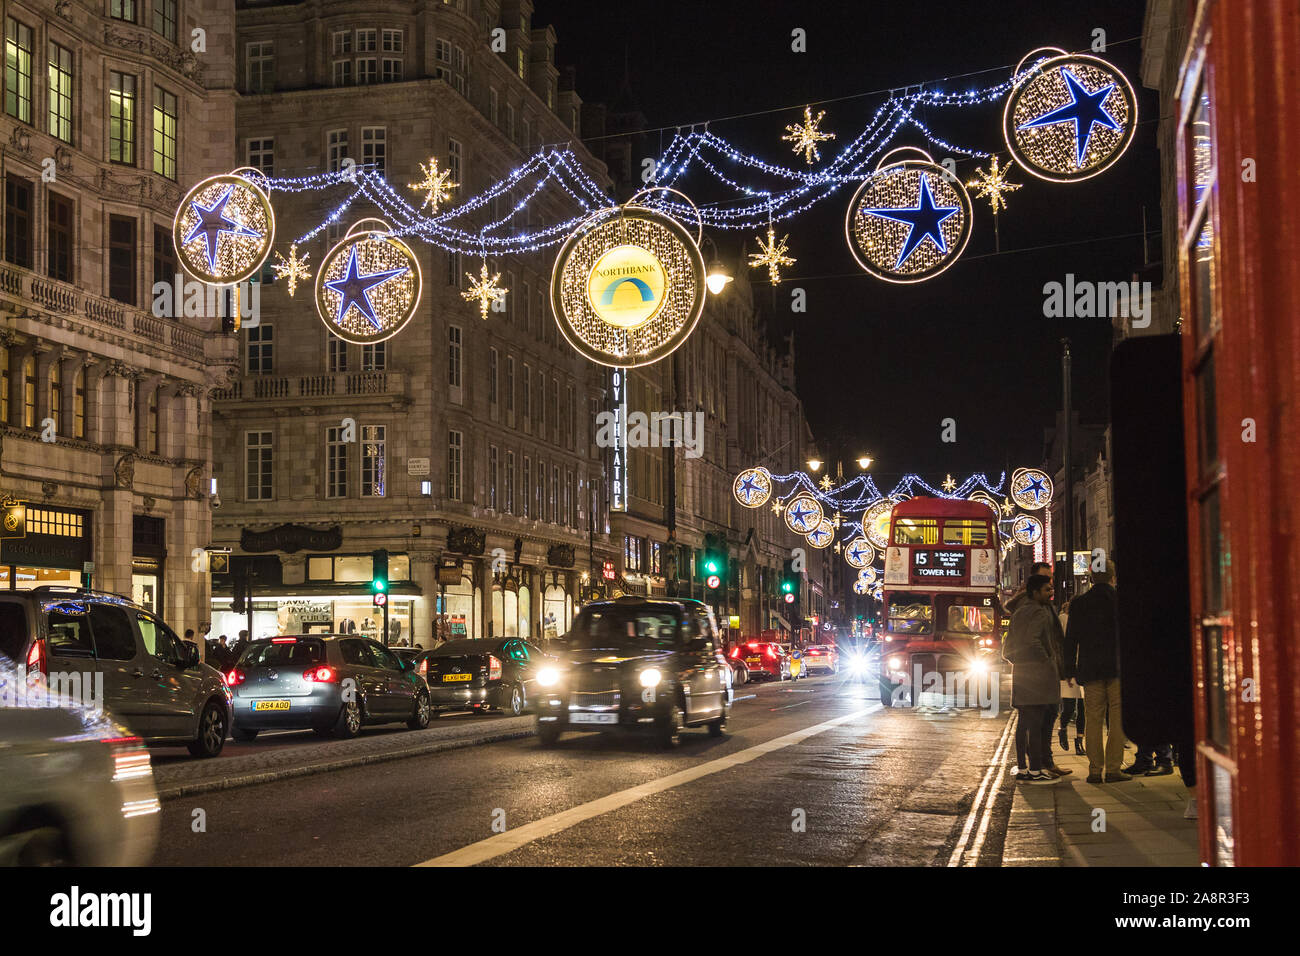 LONDON, UK - 17TH NOVEMBER 2018: A view along the Strand showing the Northbank Christmas decorations at night. People can be seen outside. Stock Photo